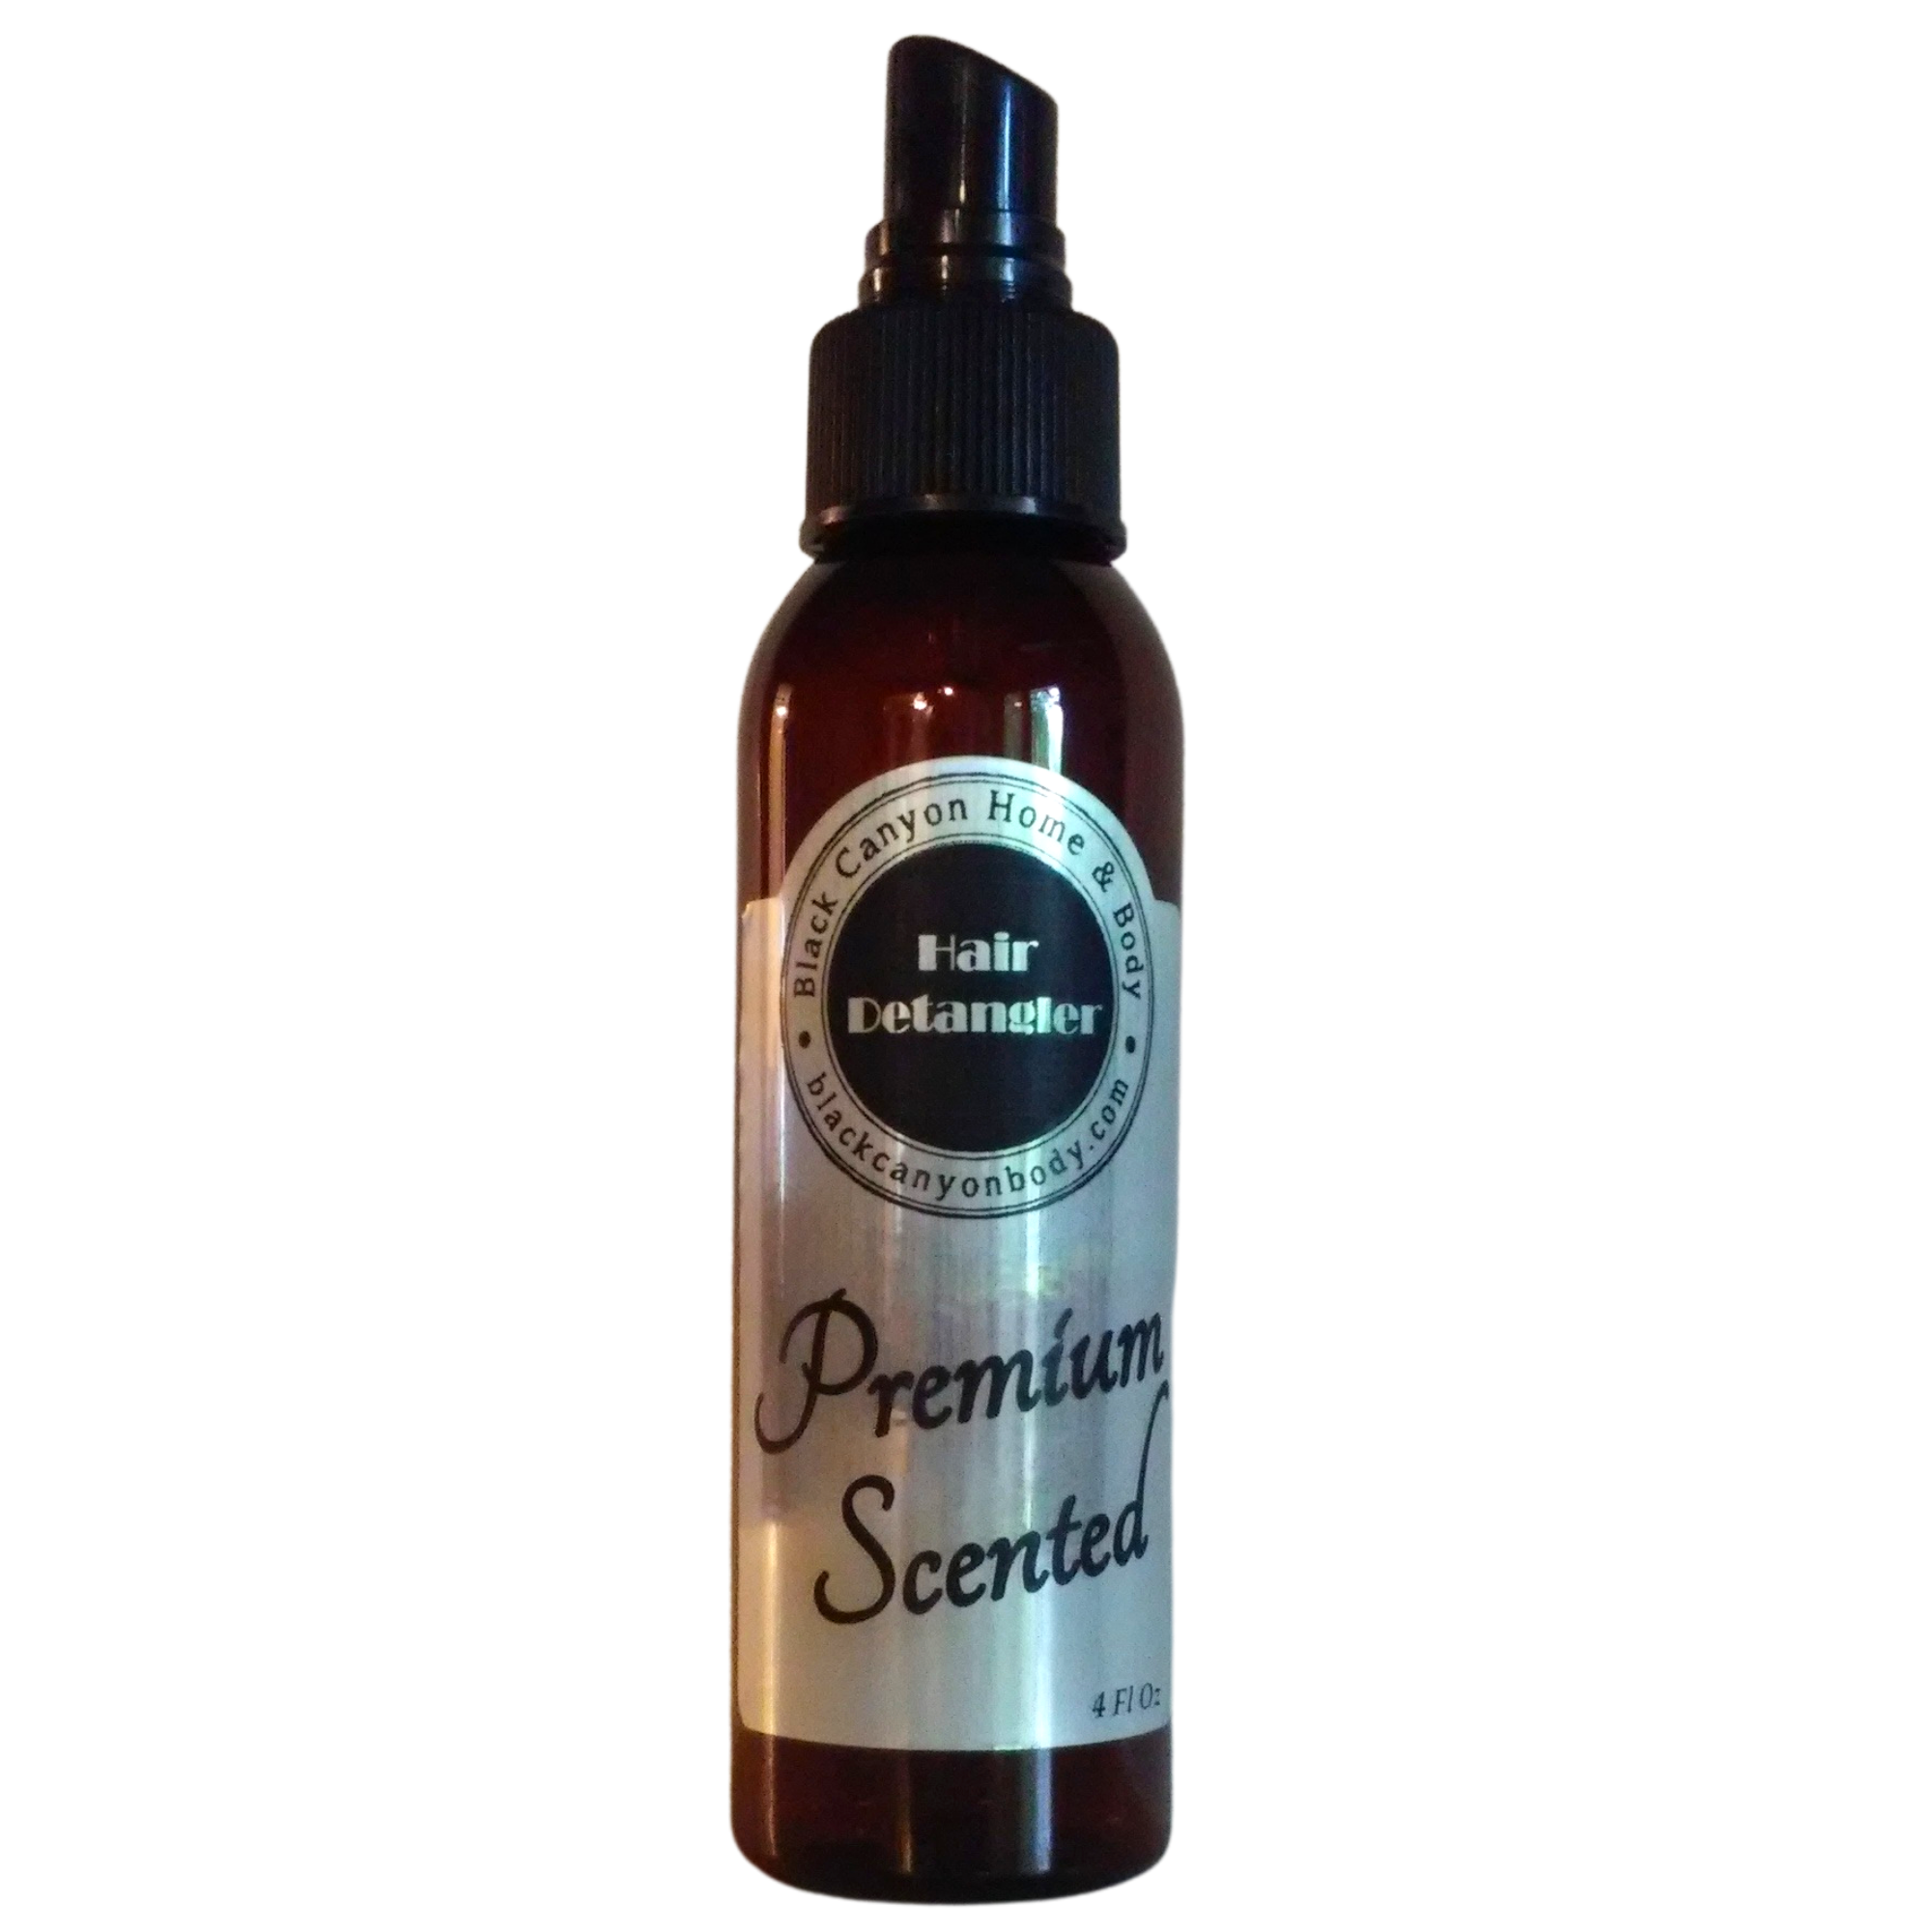 Black Canyon Green Apple & Pear Scented Hair Detangler Spray with Olive Oil